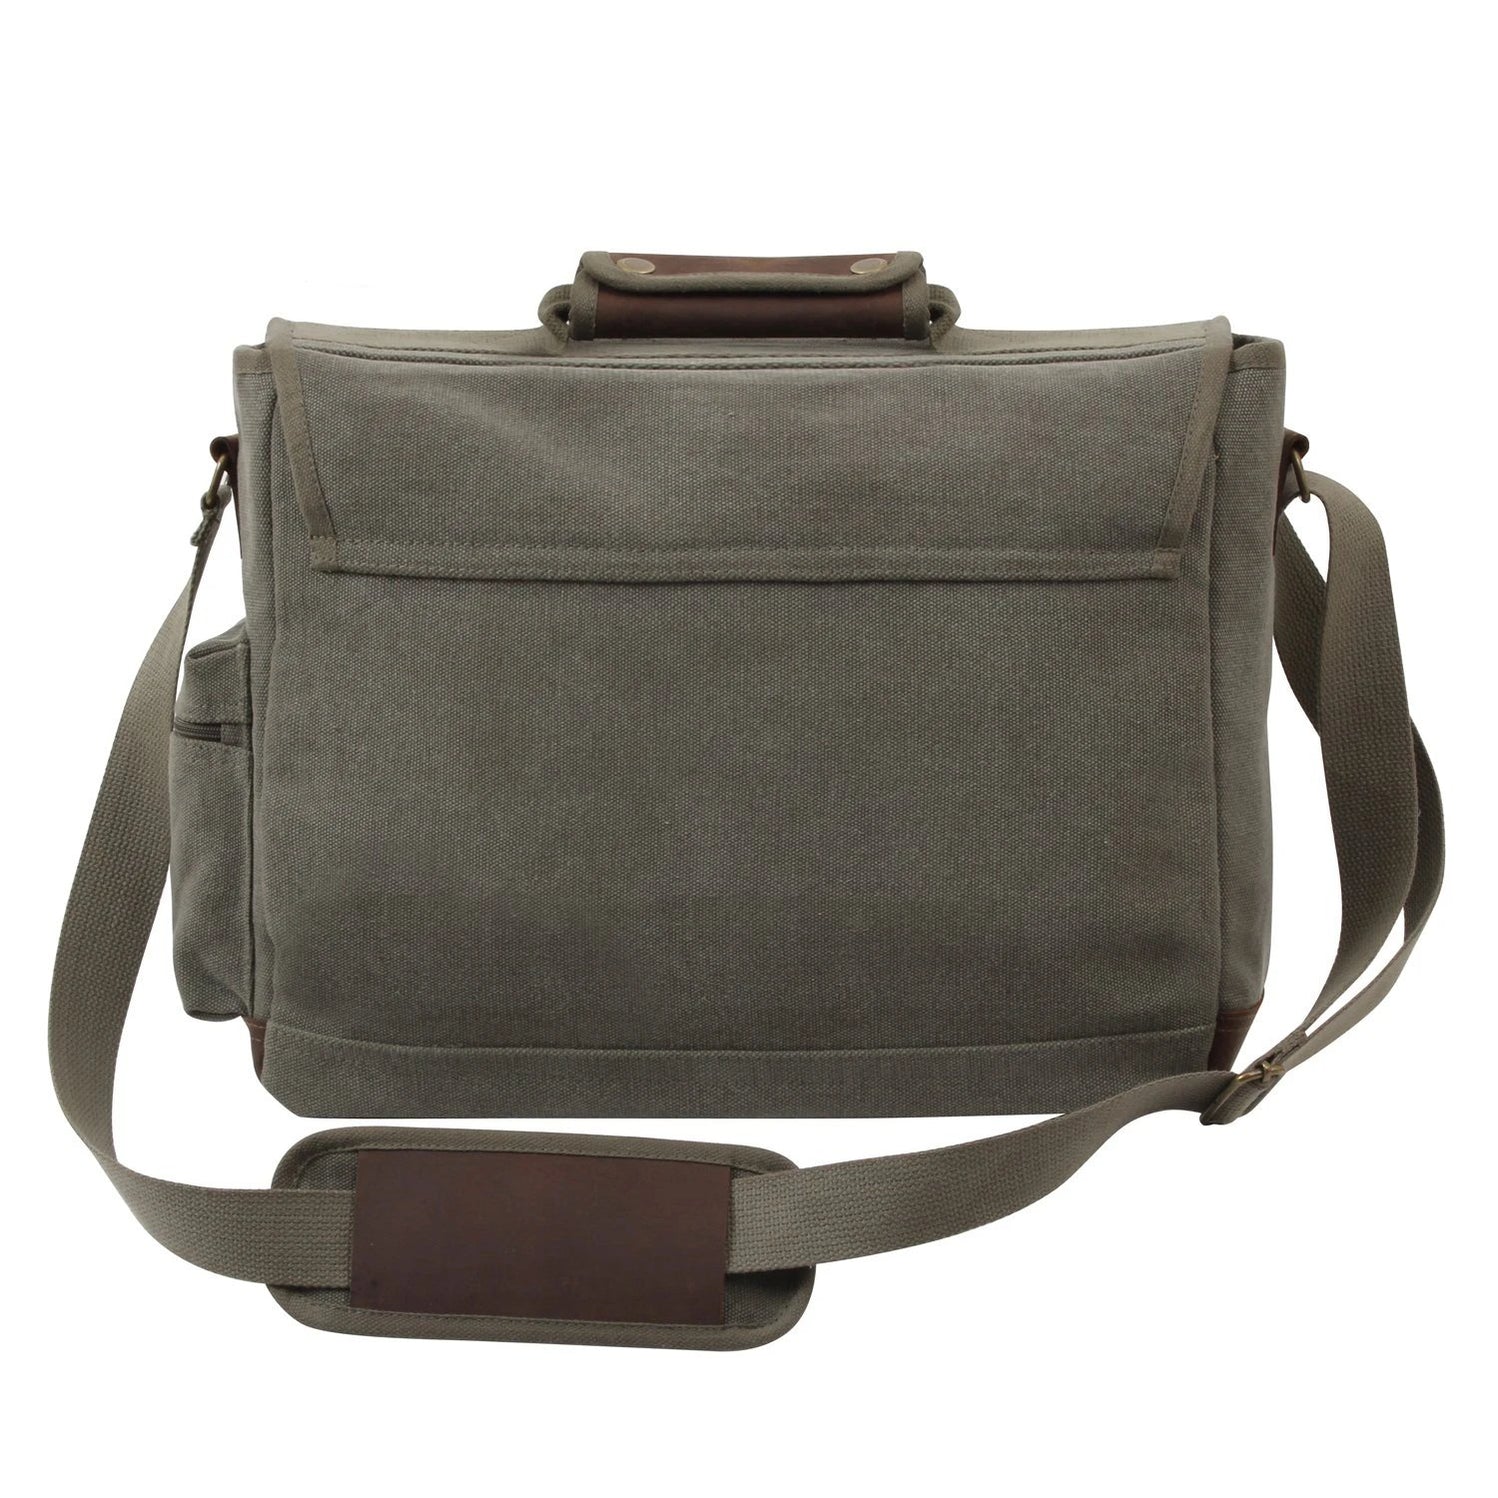 Rothco Vintage Canvas Pathfinder Laptop Bag with Leather Accents — Luminary